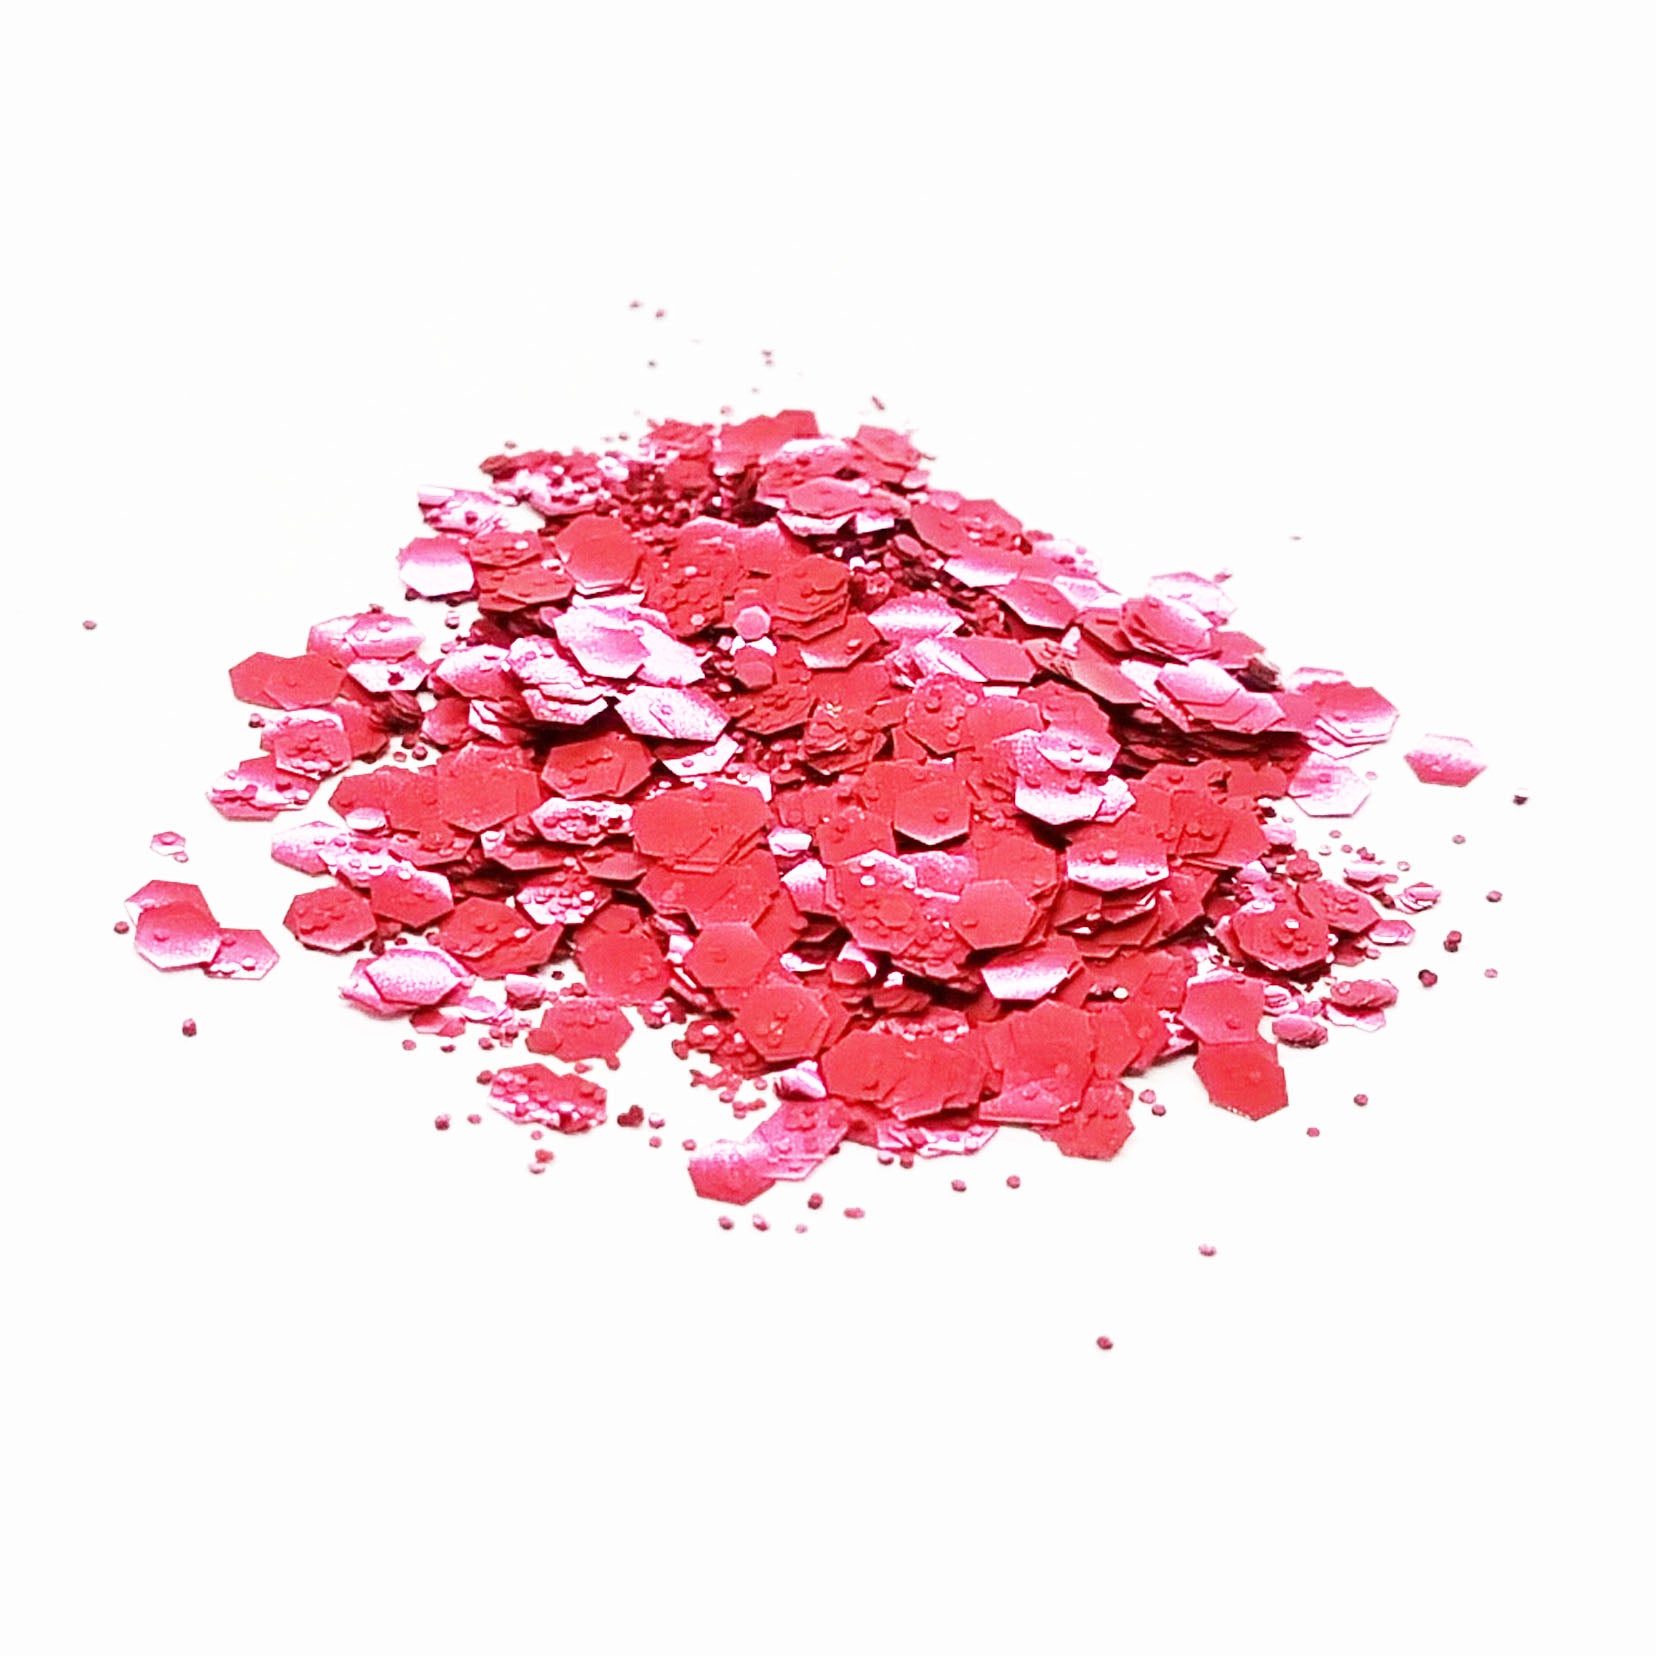 Red Biodegradable Cosmetic Glitter | Mix | Truly Personal | Wax Melt Bath Bombs Soap